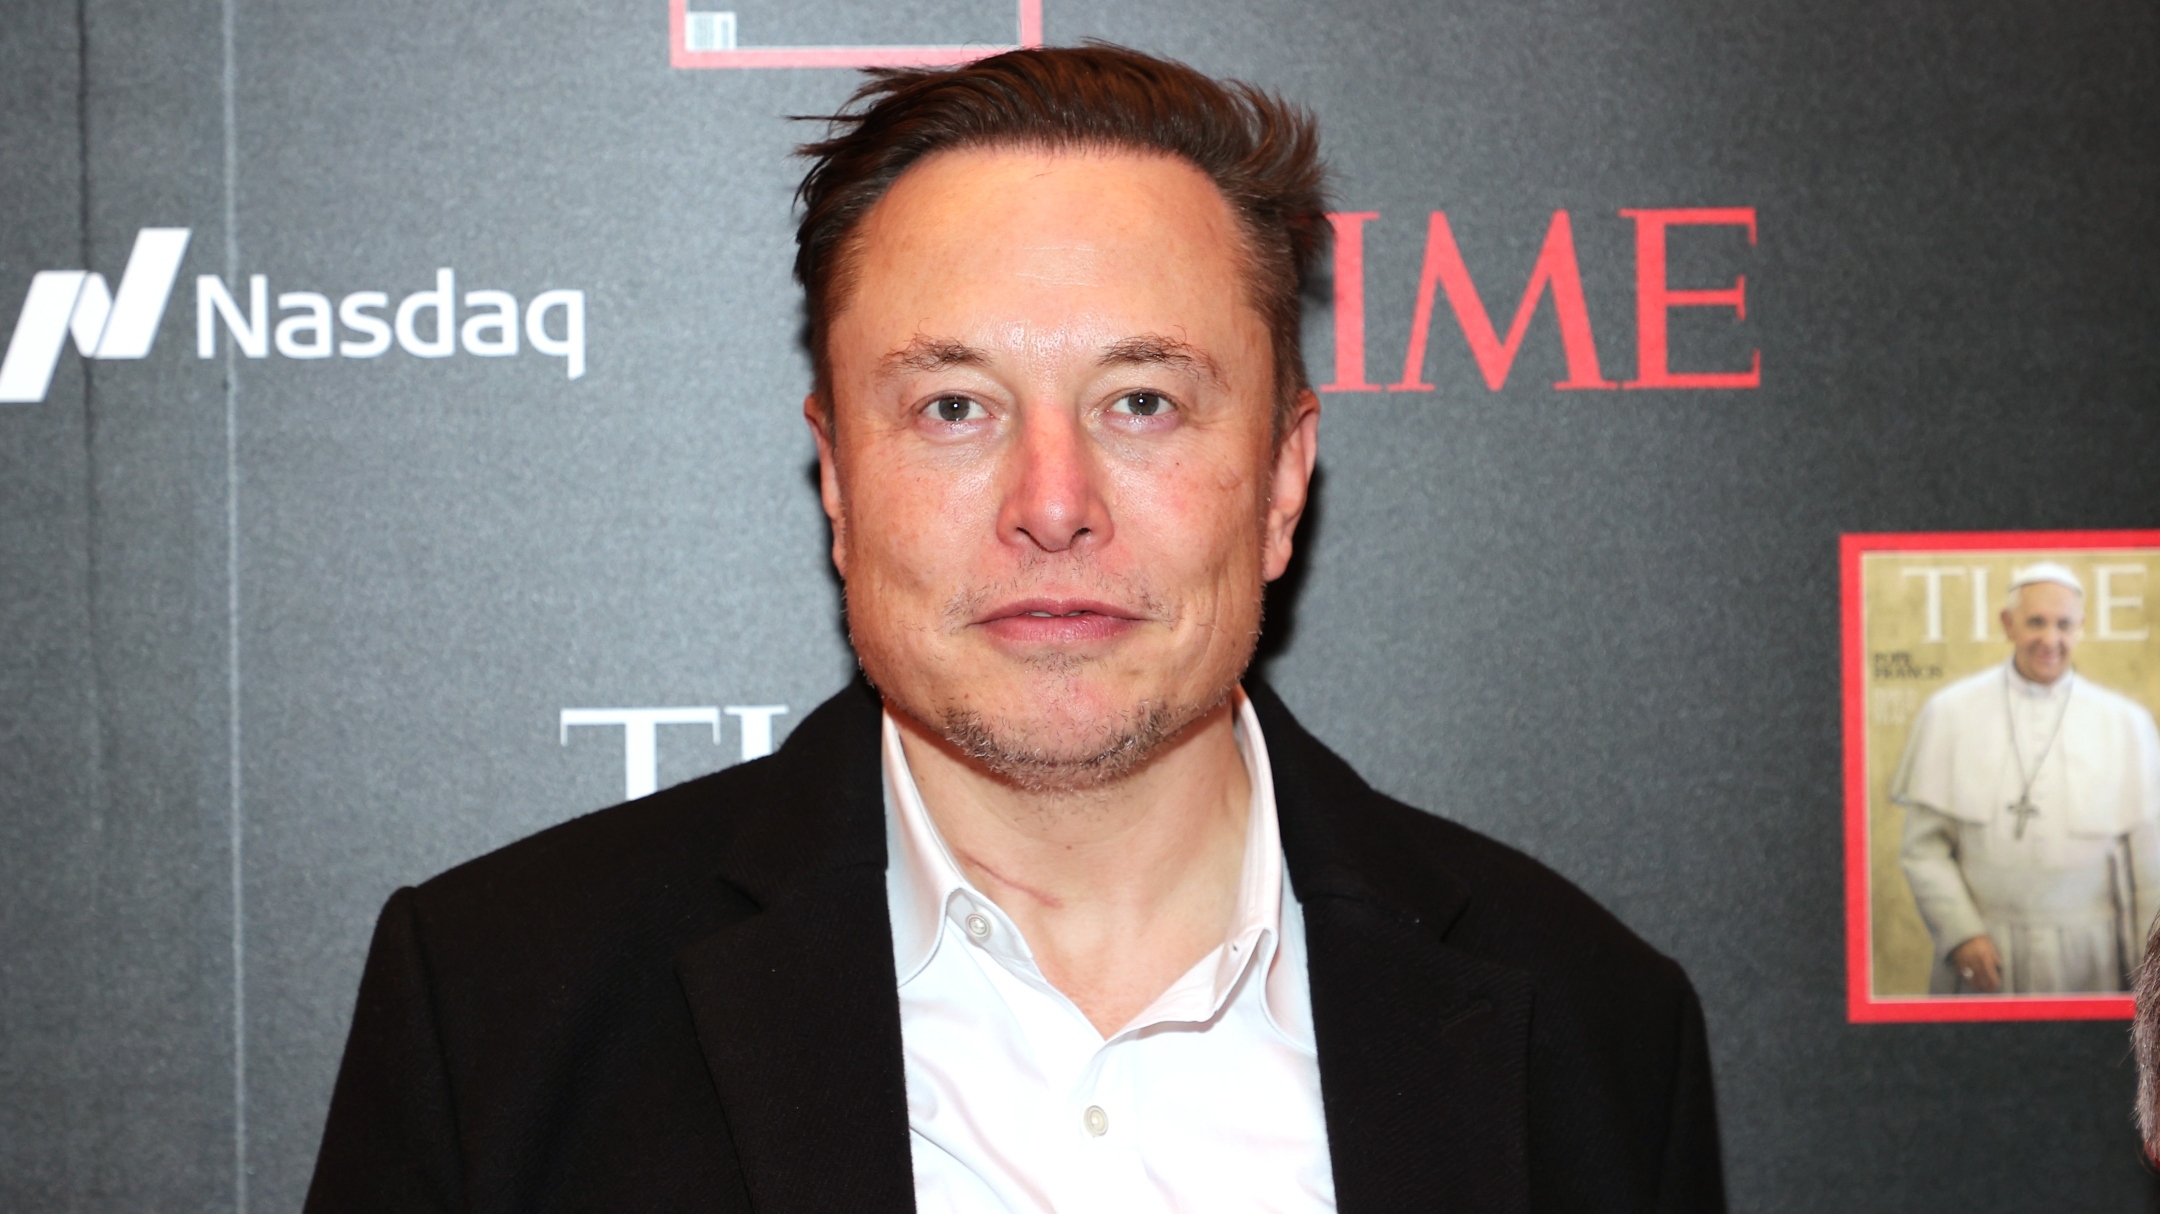 Elon Musk attends a TIME Person of the Year event in New York City, Dec. 13, 2021. (Theo Wargo/Getty Images for TIME)